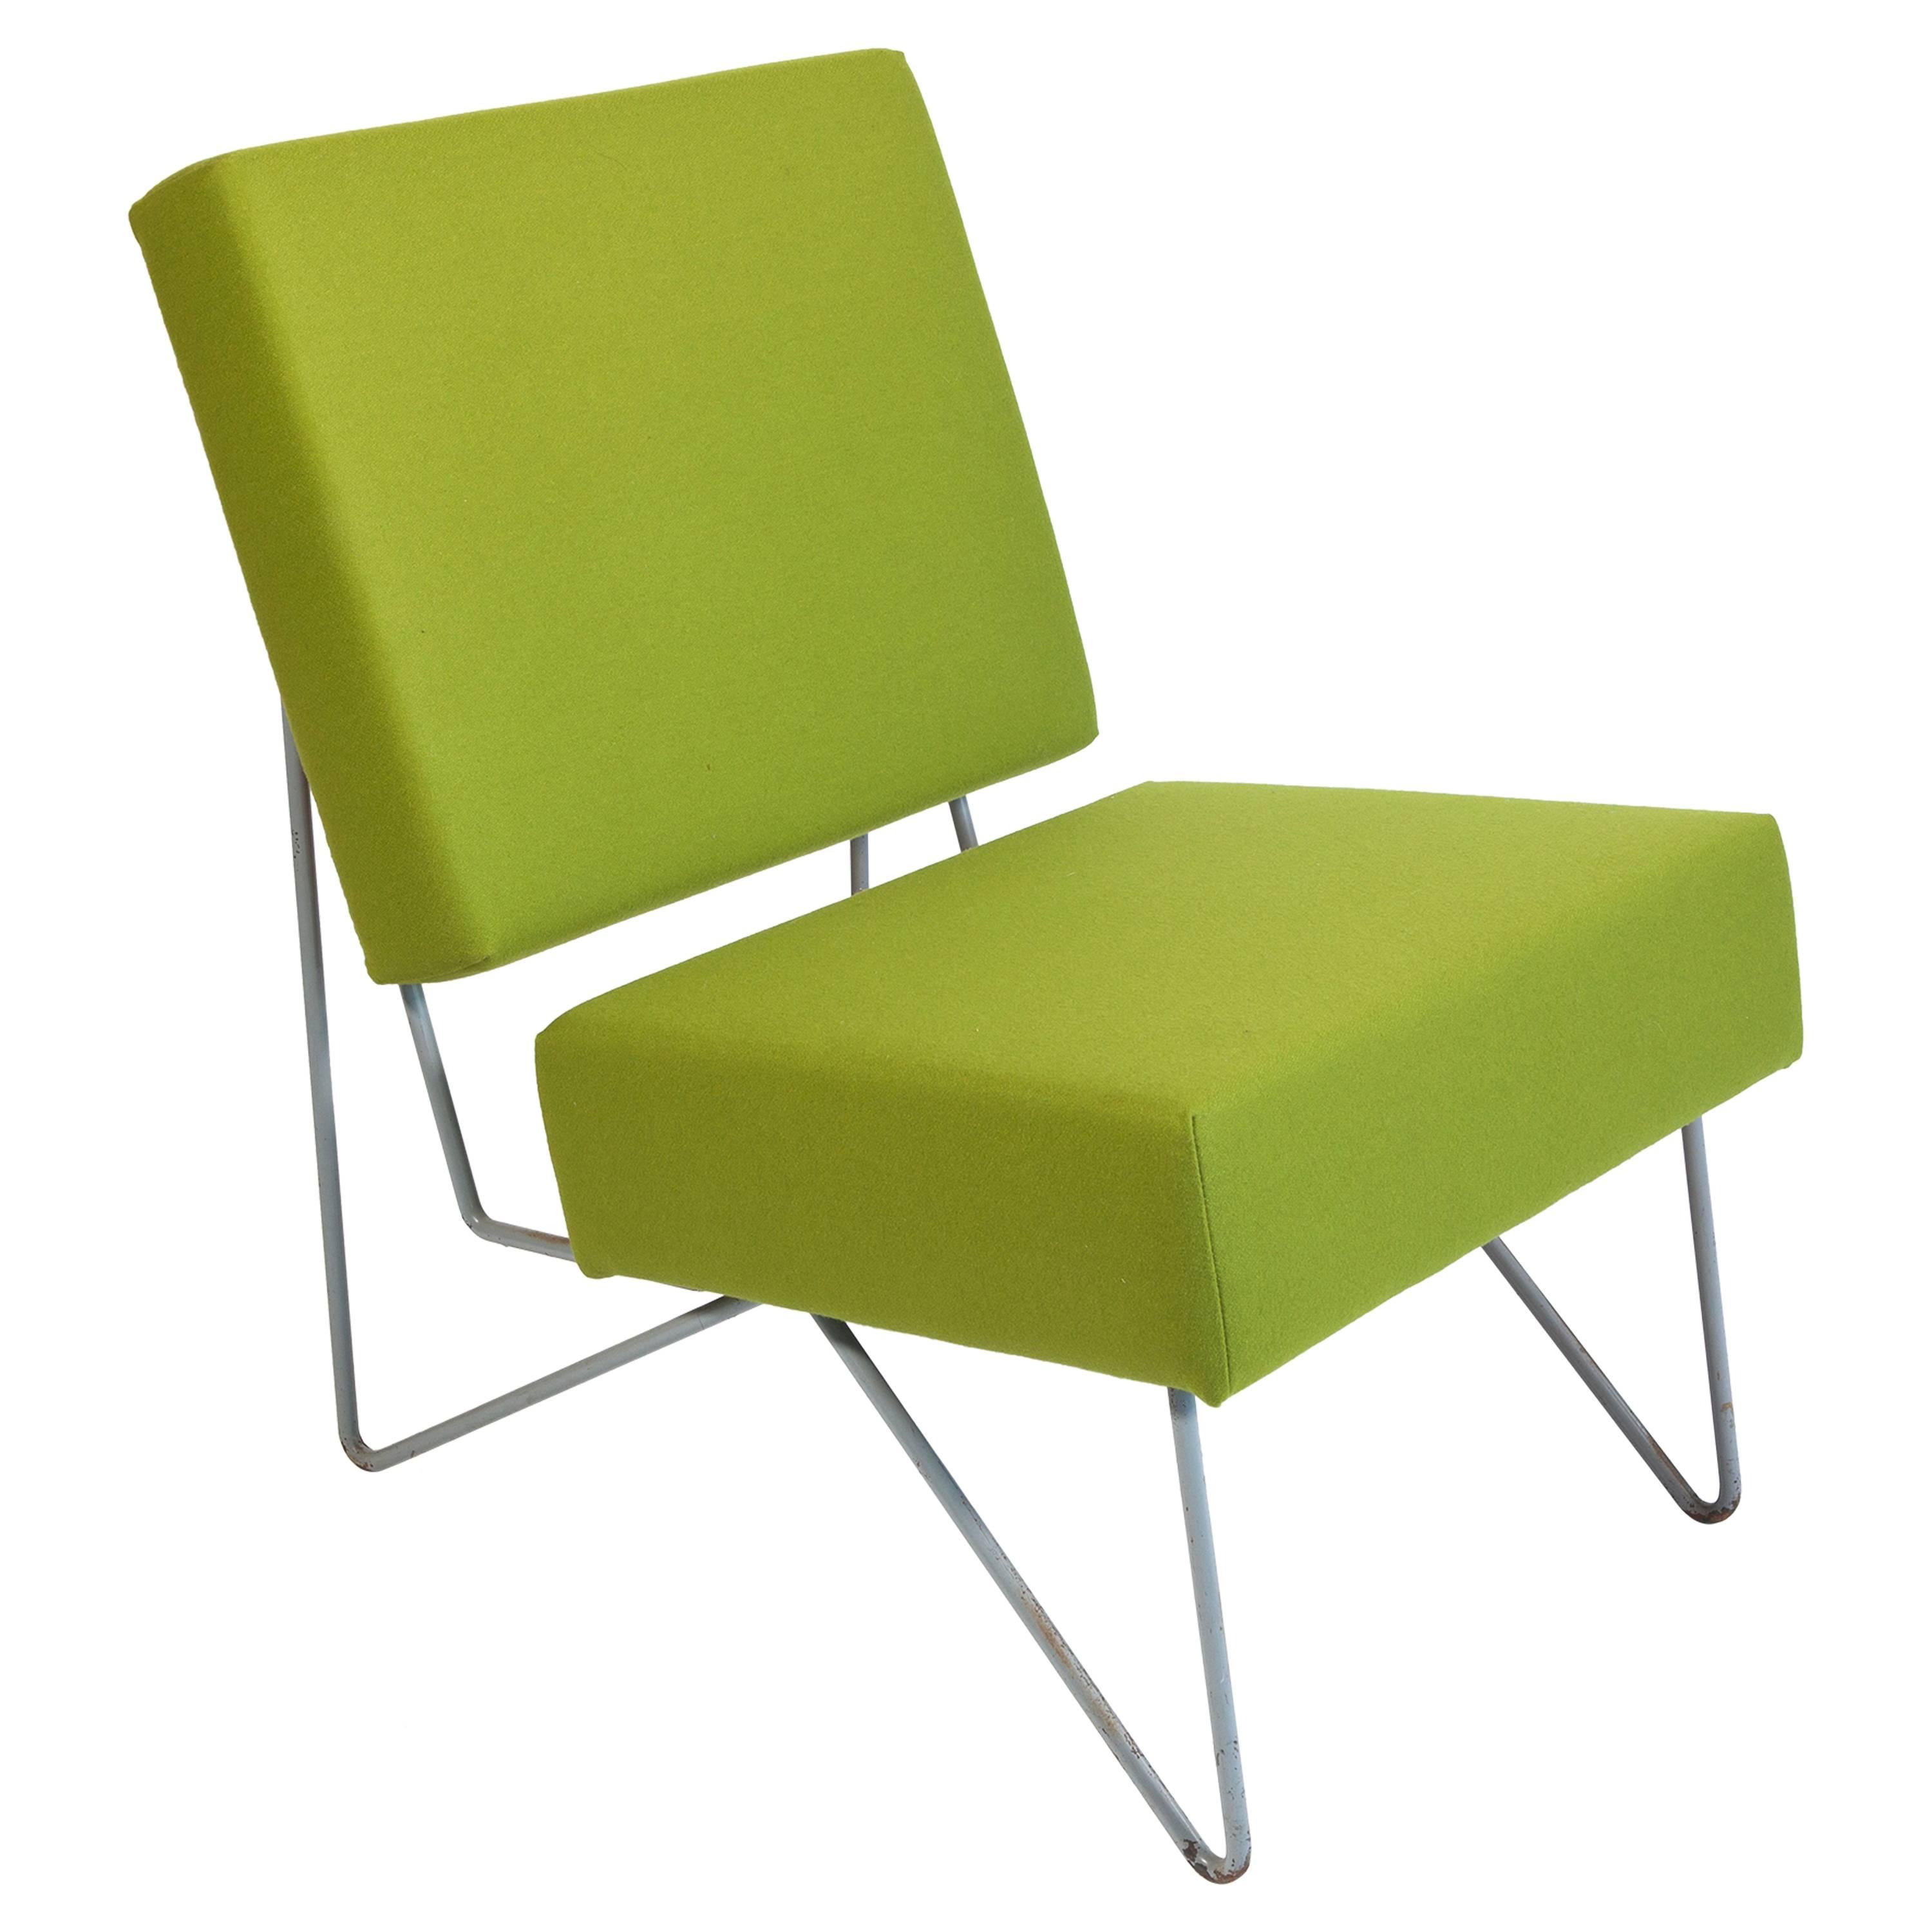 Combex FM03 Chair Designed by Cees Braakman for Pastoe, 1954 For Sale